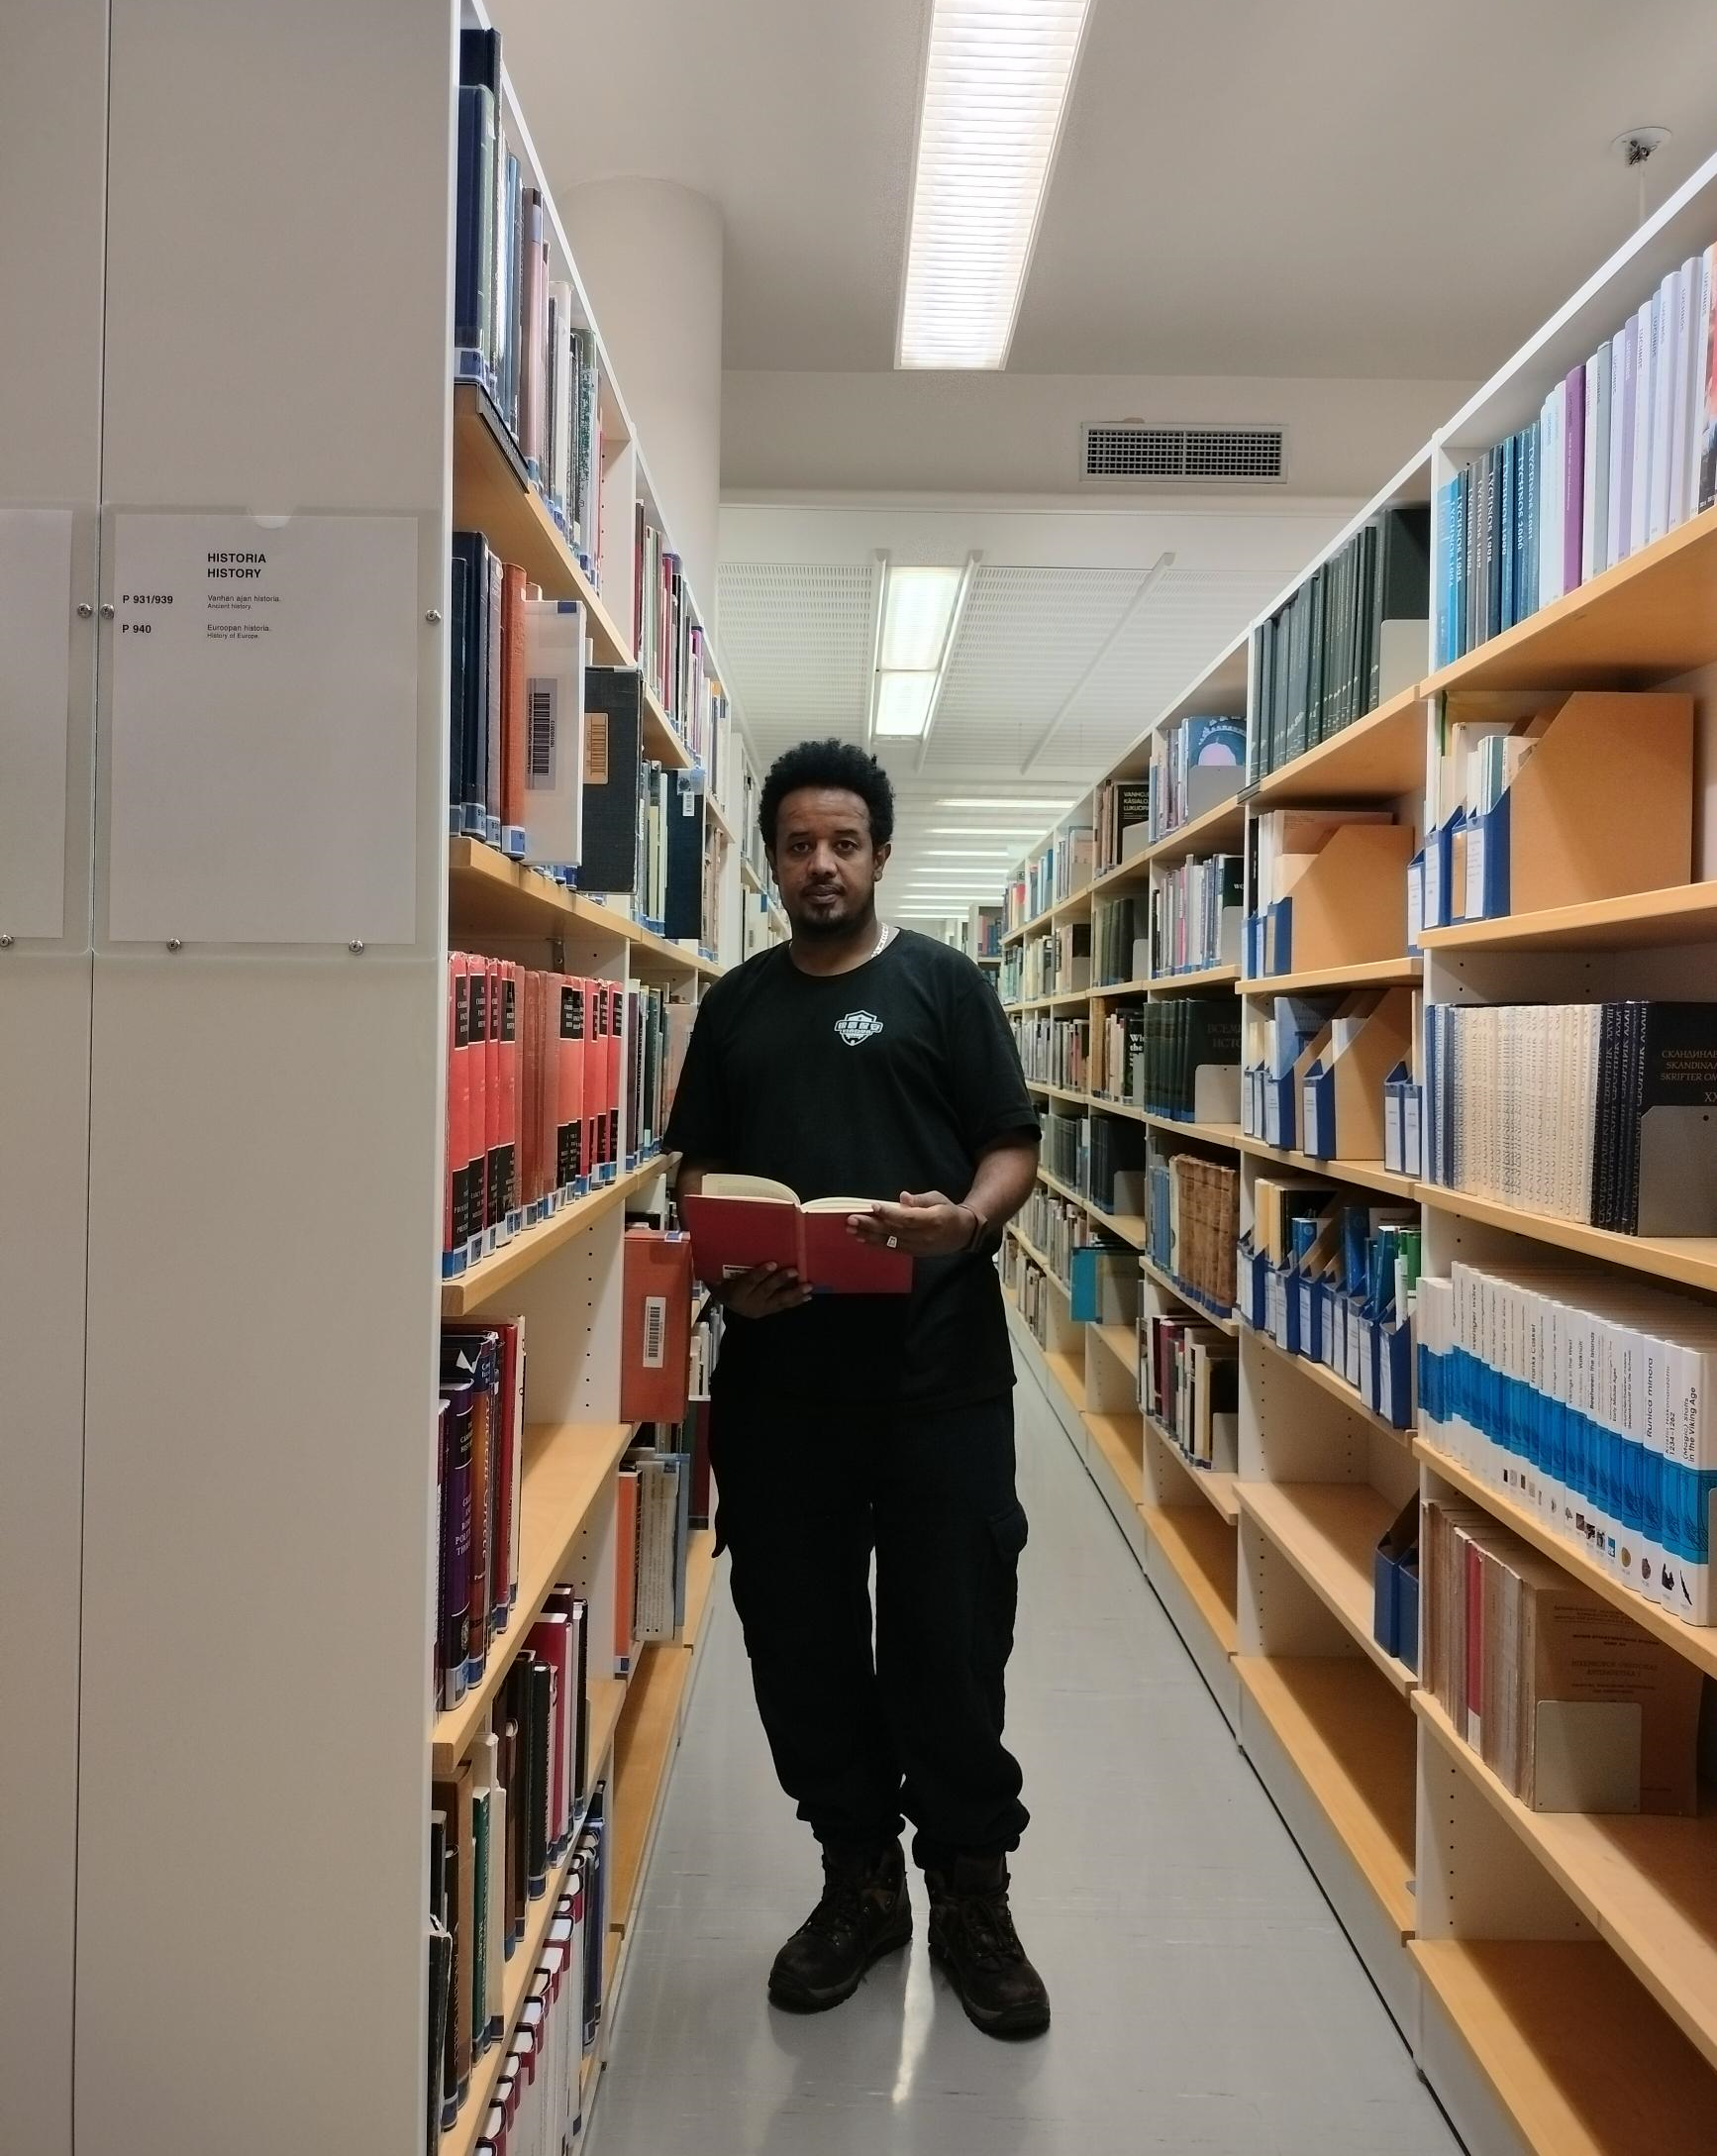 Intern Michael Gebremedhin in a library collection hall. Michael is standing between two shelves and holding an open book in his hands.